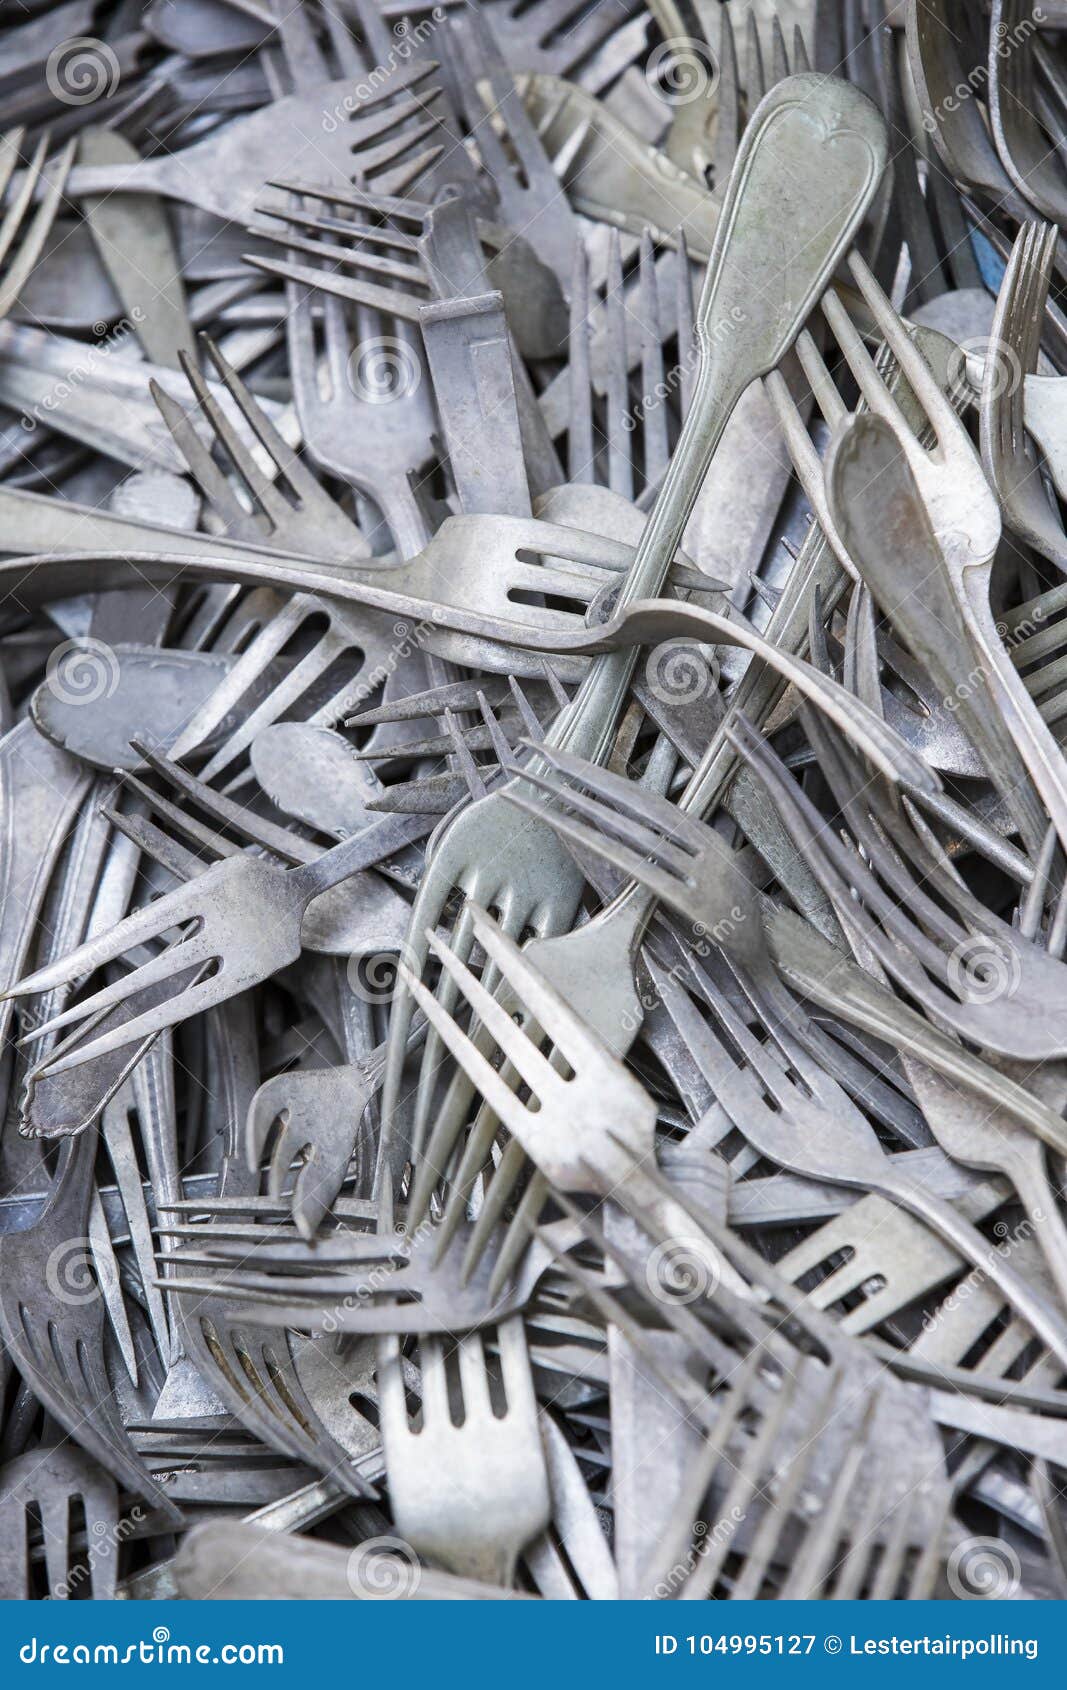 background of old dirty cutlery